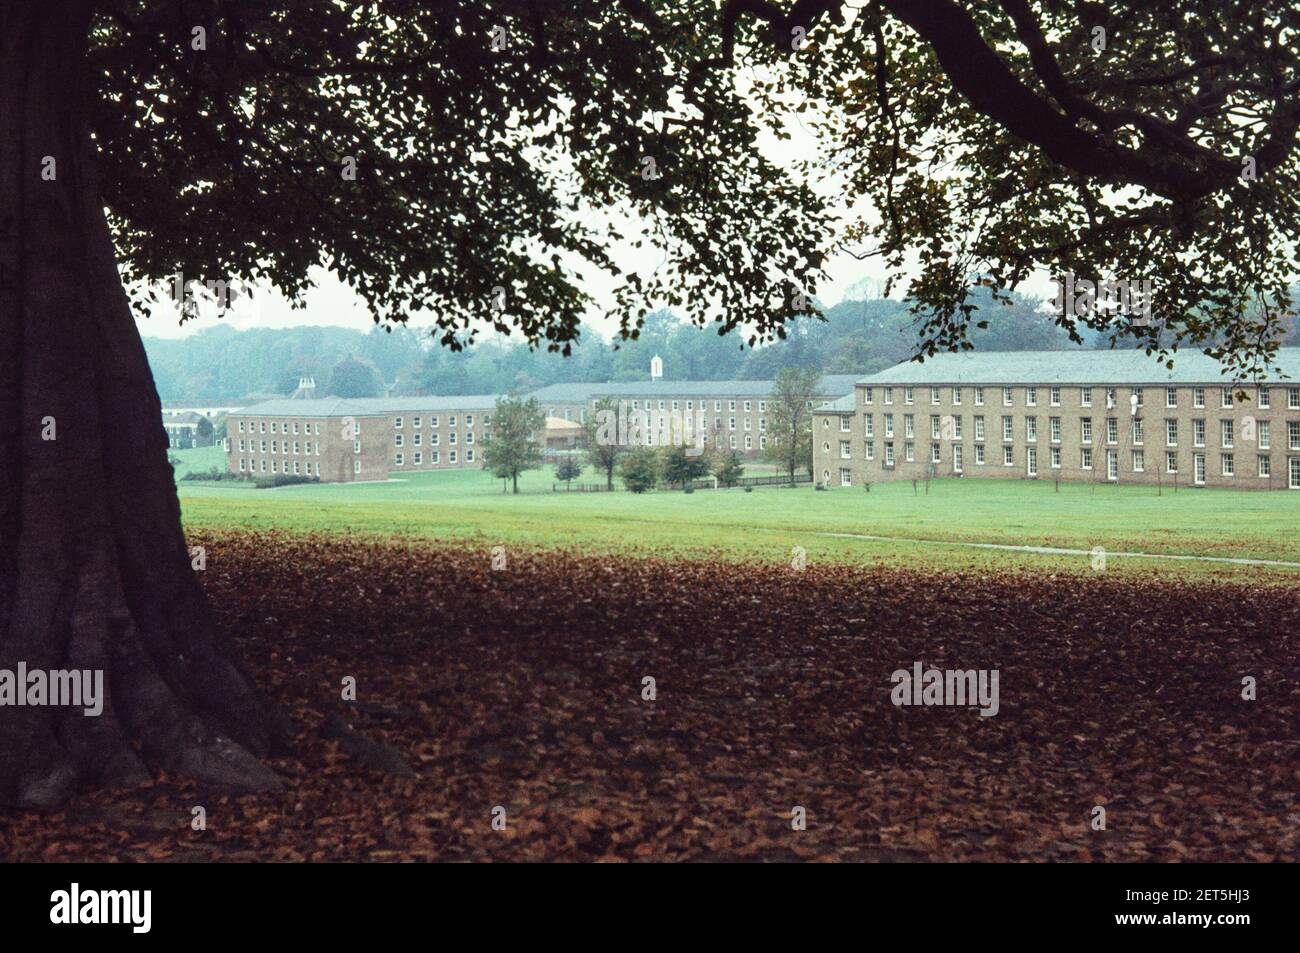 1979 Nottingham University Campus Nottingham England - view of Derby Hall amd Lincoln Hall, both Student Halls of Residence across the Nottingham University Downs University of nottingham campus Nottingham University England GB UK Europe Stock Photo